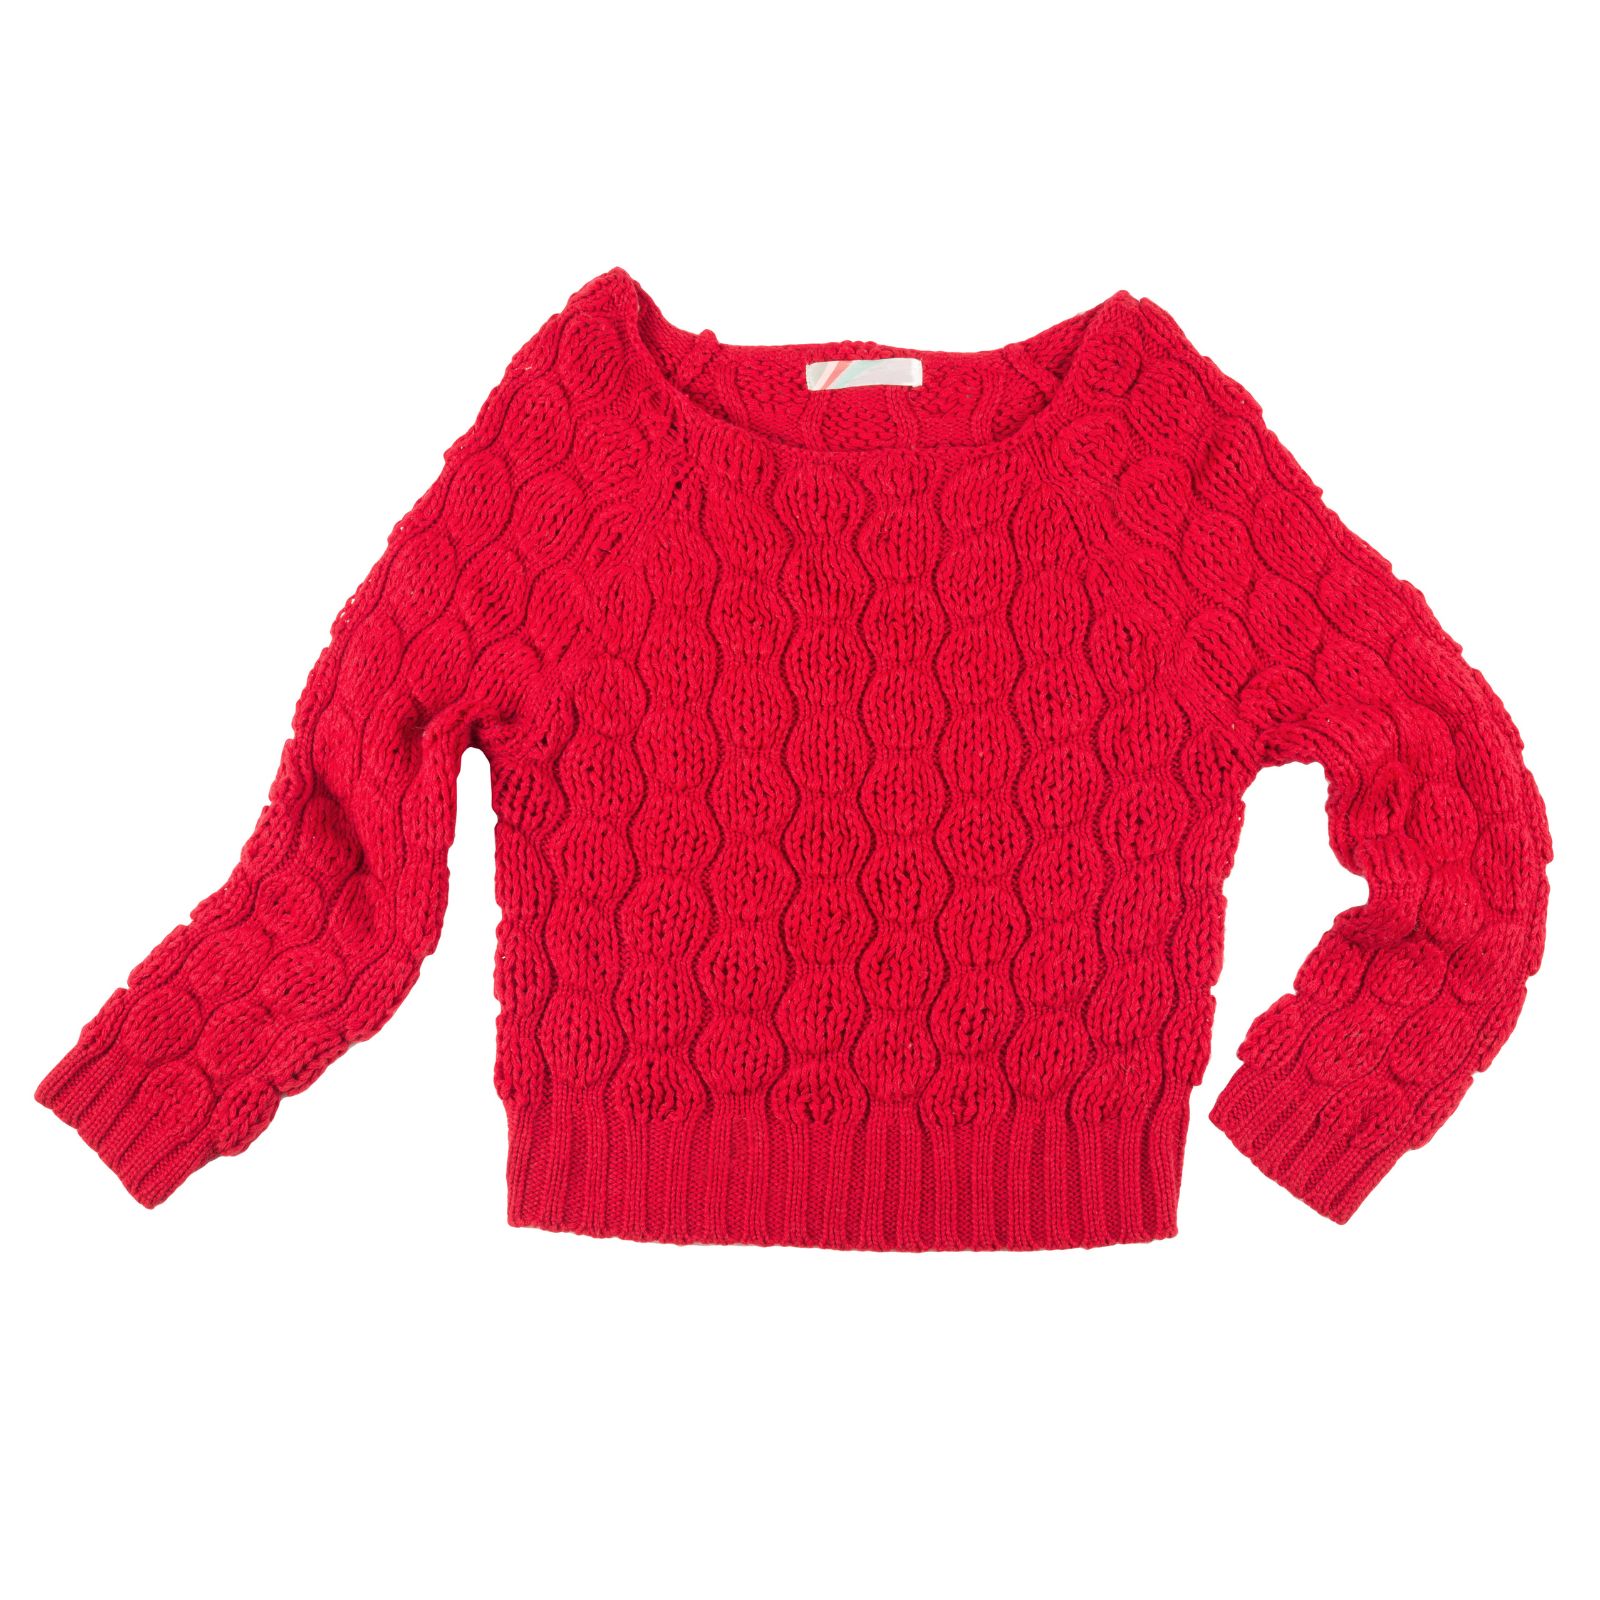 Premium Quality Red Sweater For Kids.